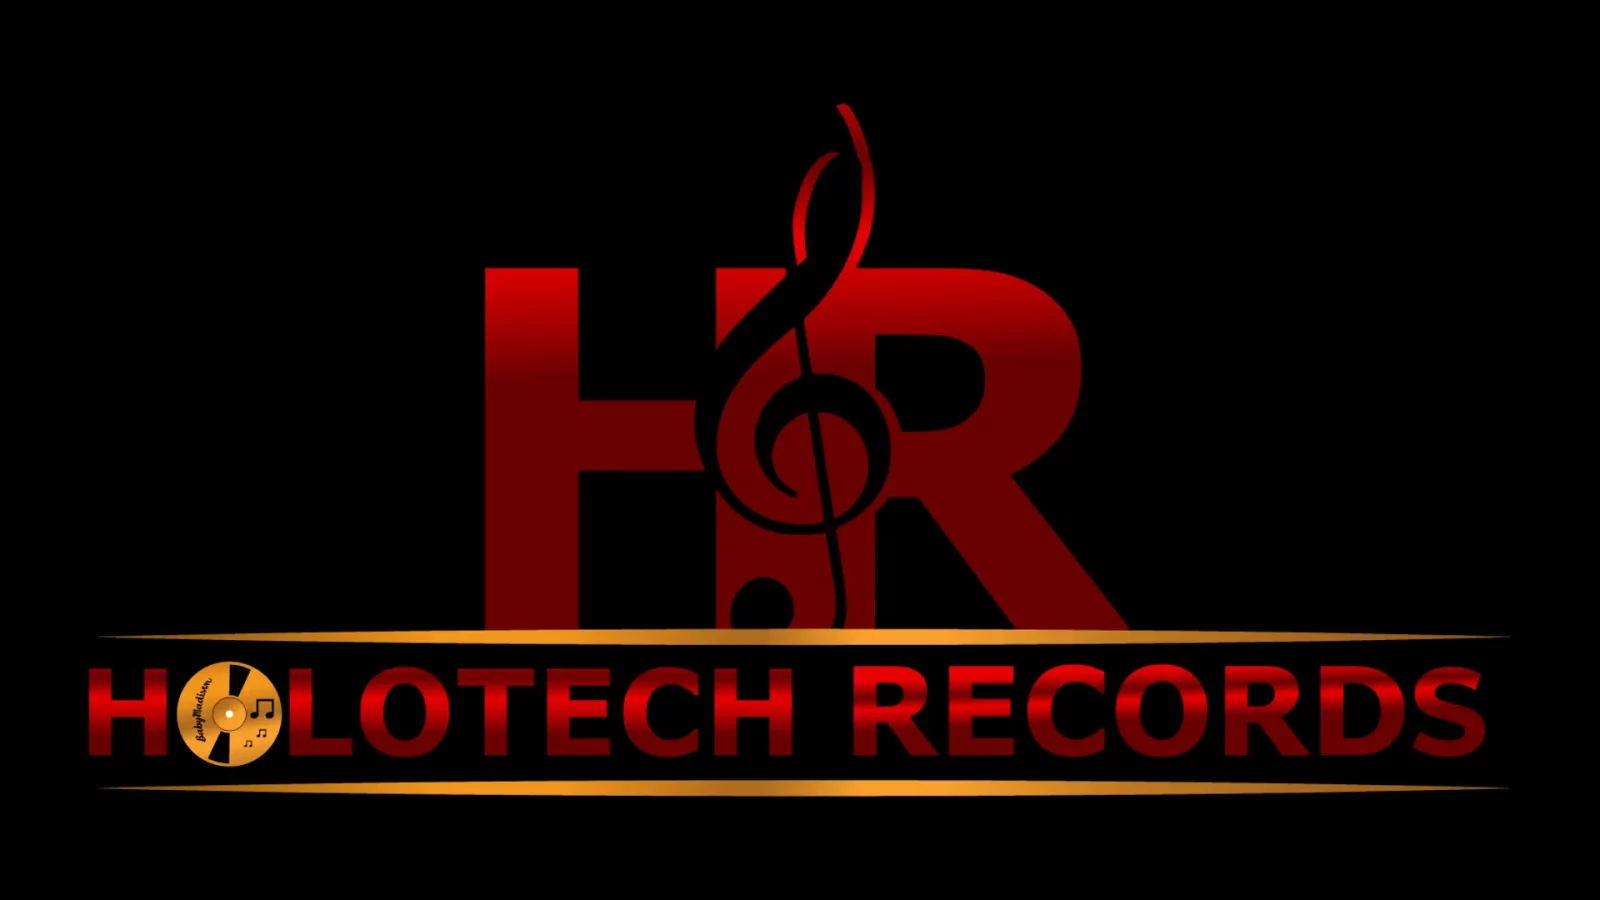 HoloTech Records the birth of a new musical giant